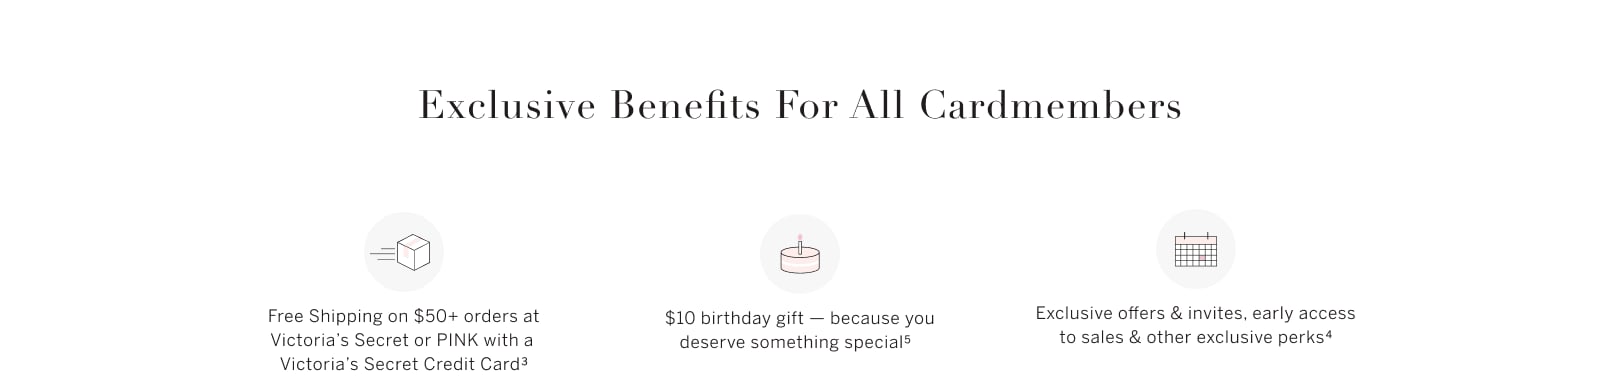 Exclusive Benefits for all Cardmembers. Free Shipping on $50+ orders at Victorias Secret or PINK with a Victorias Secret Credit Card. $10 birthday gift - because you deserve something special. Exclusive offers and invites, early access to sales and other exclusive perks.